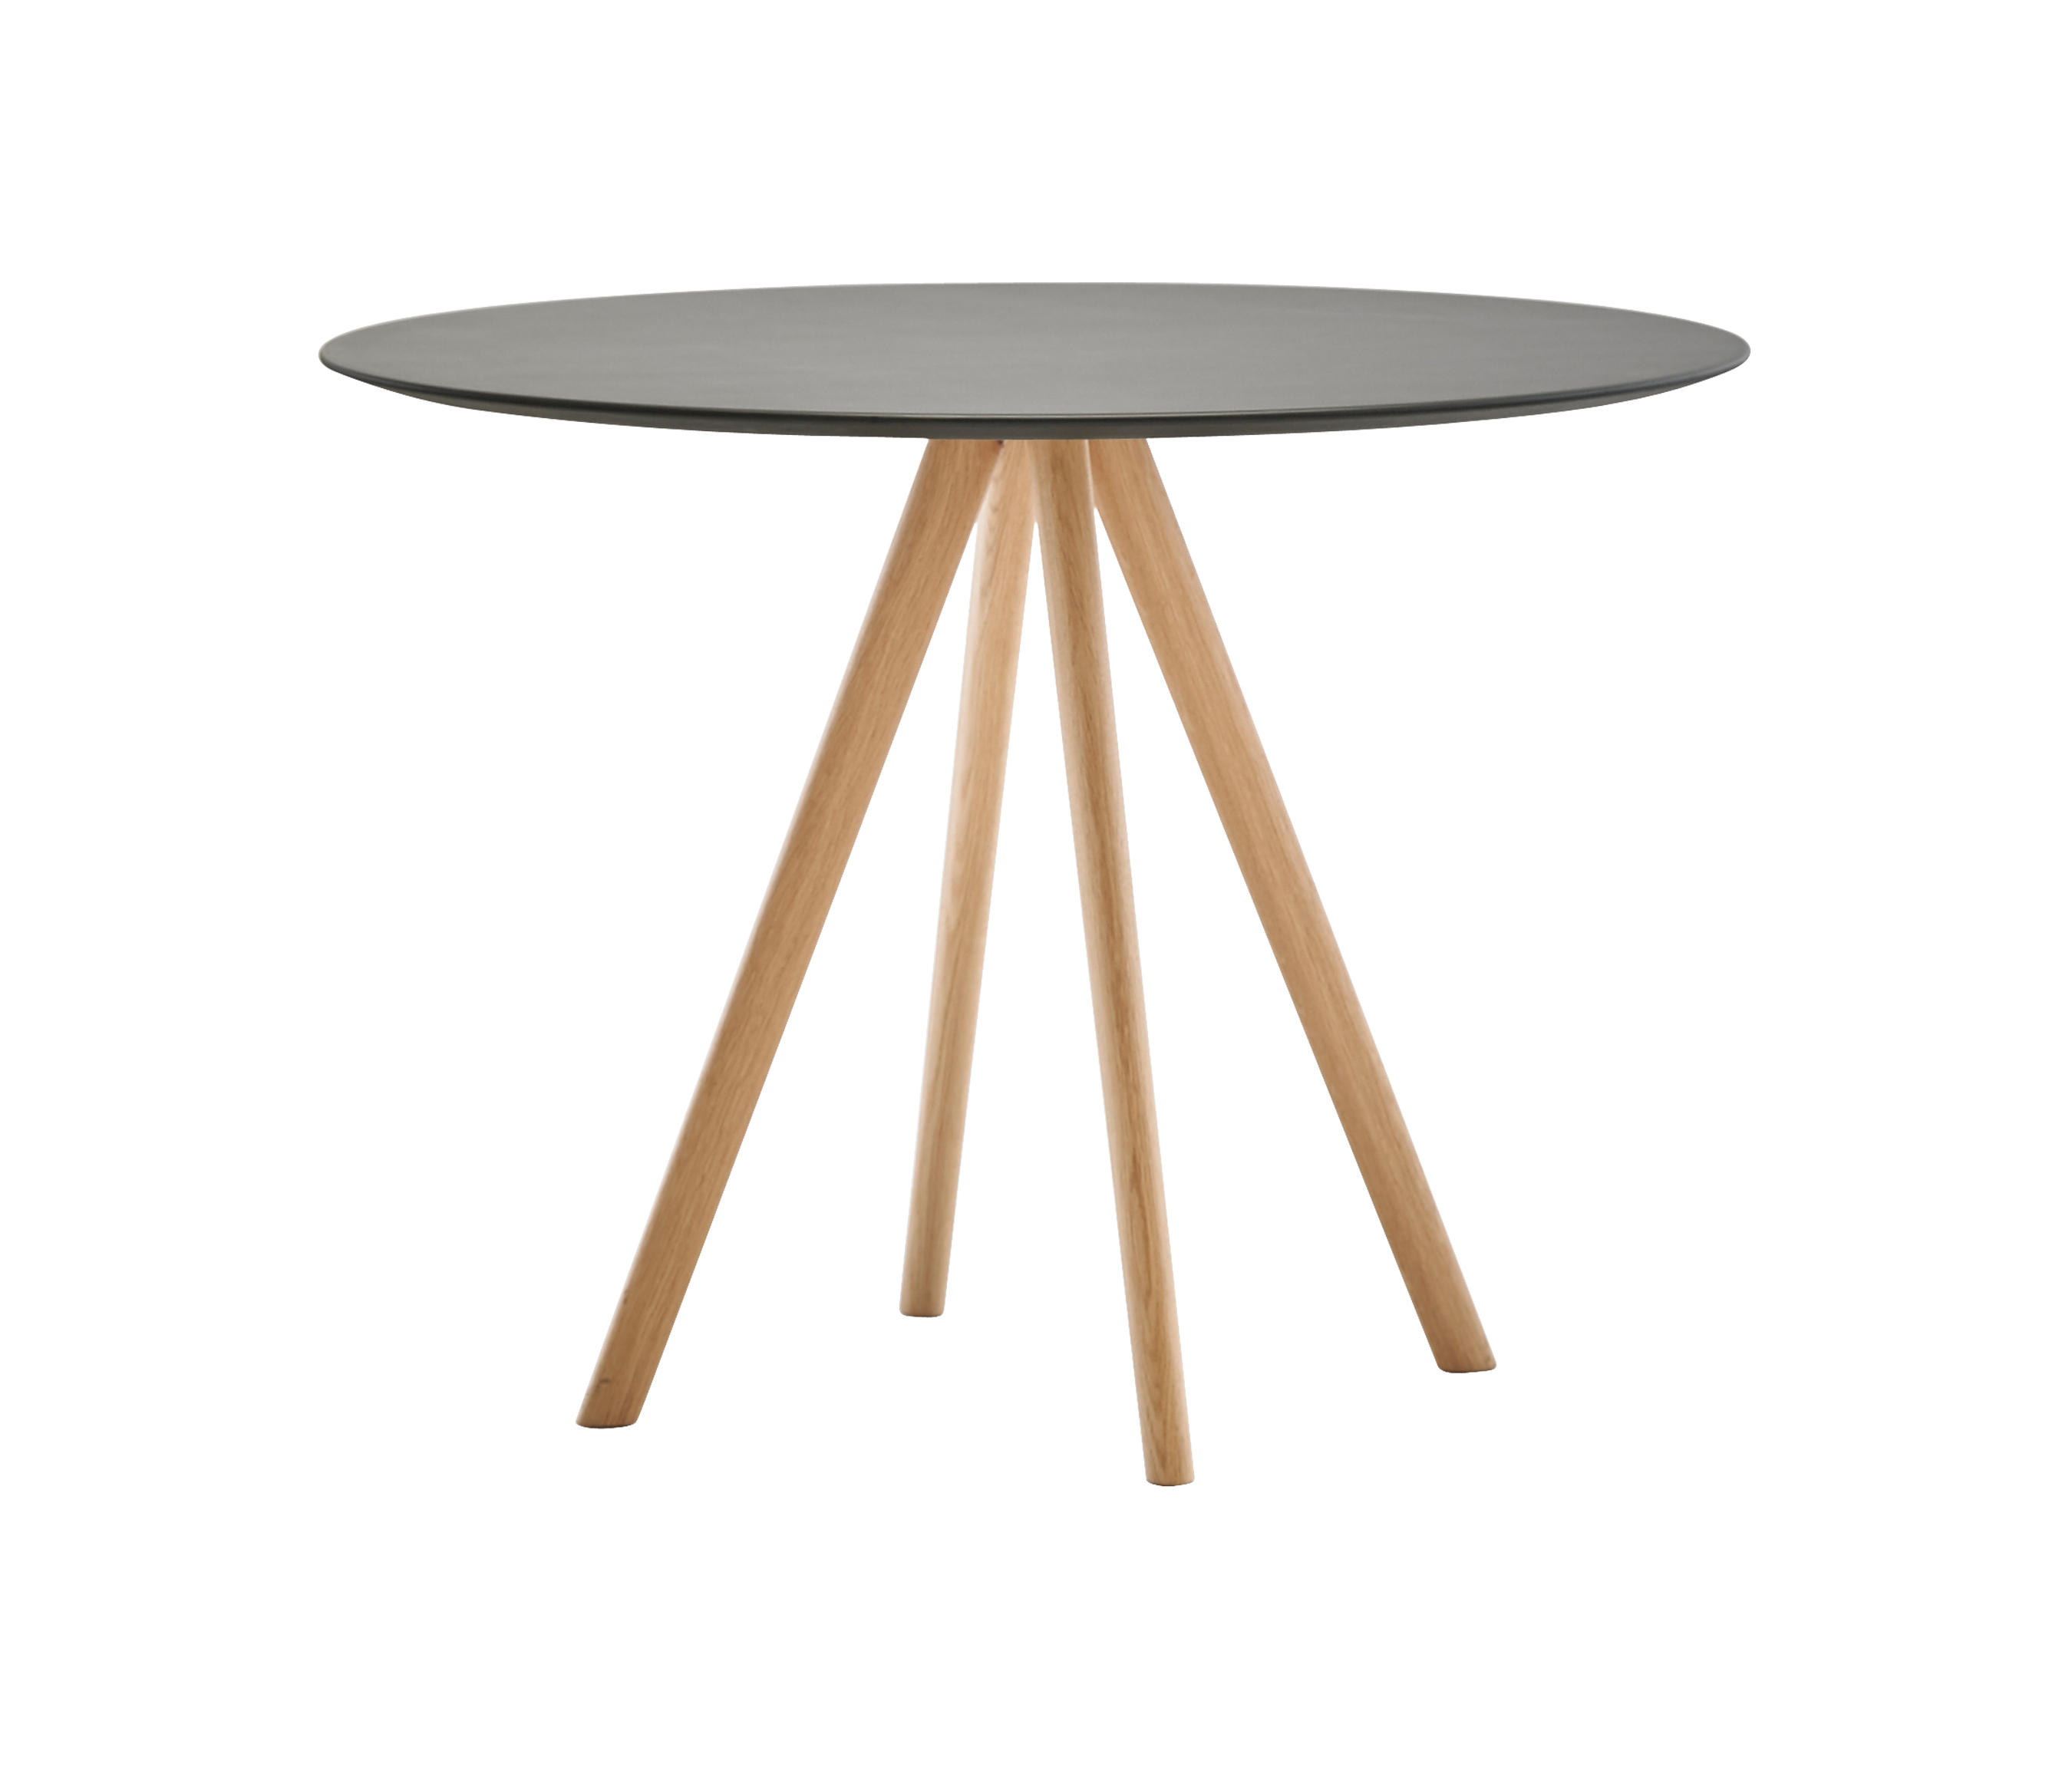 Stiks Table by Christophe Pillet for Inclass